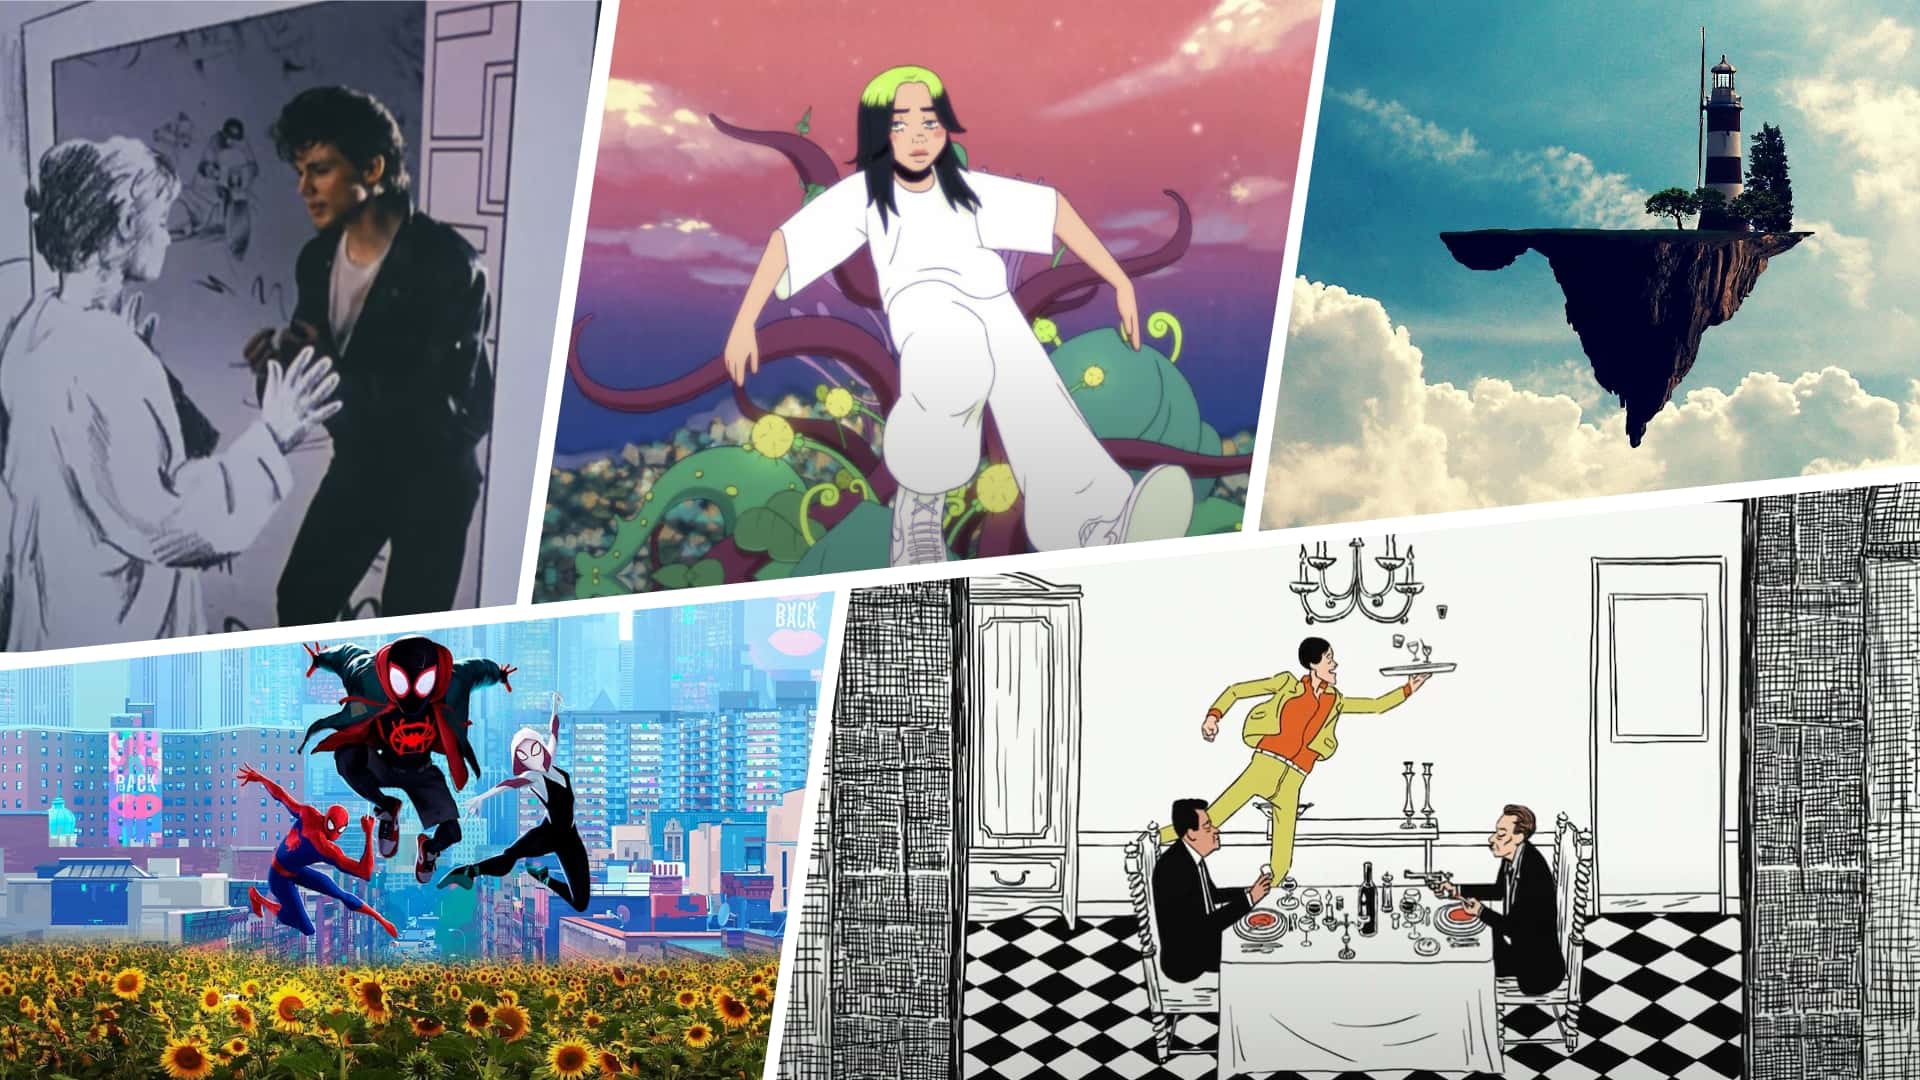 Best Animated Music Videos of All Time — Top 20 List